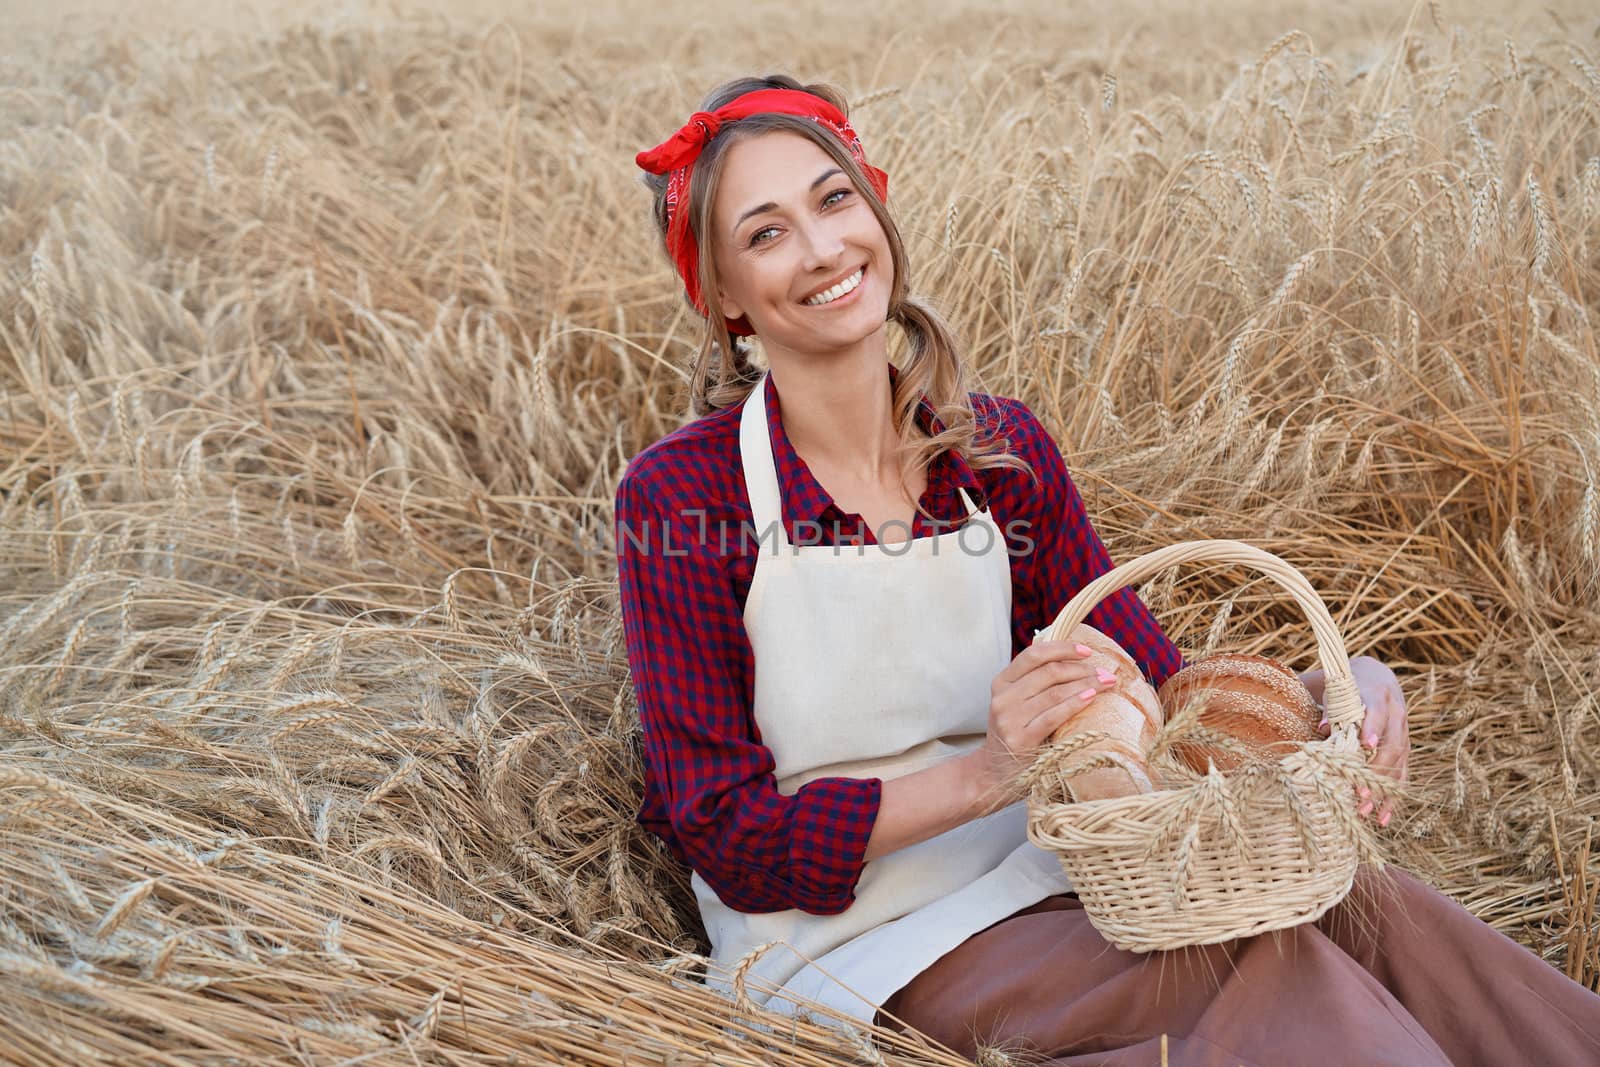 Female farmer sitting wheat agricultural field Woman baker holding wicker basket bread eco product Baking small business Caucasian person dressed red plaid shirt apron organic healthy food